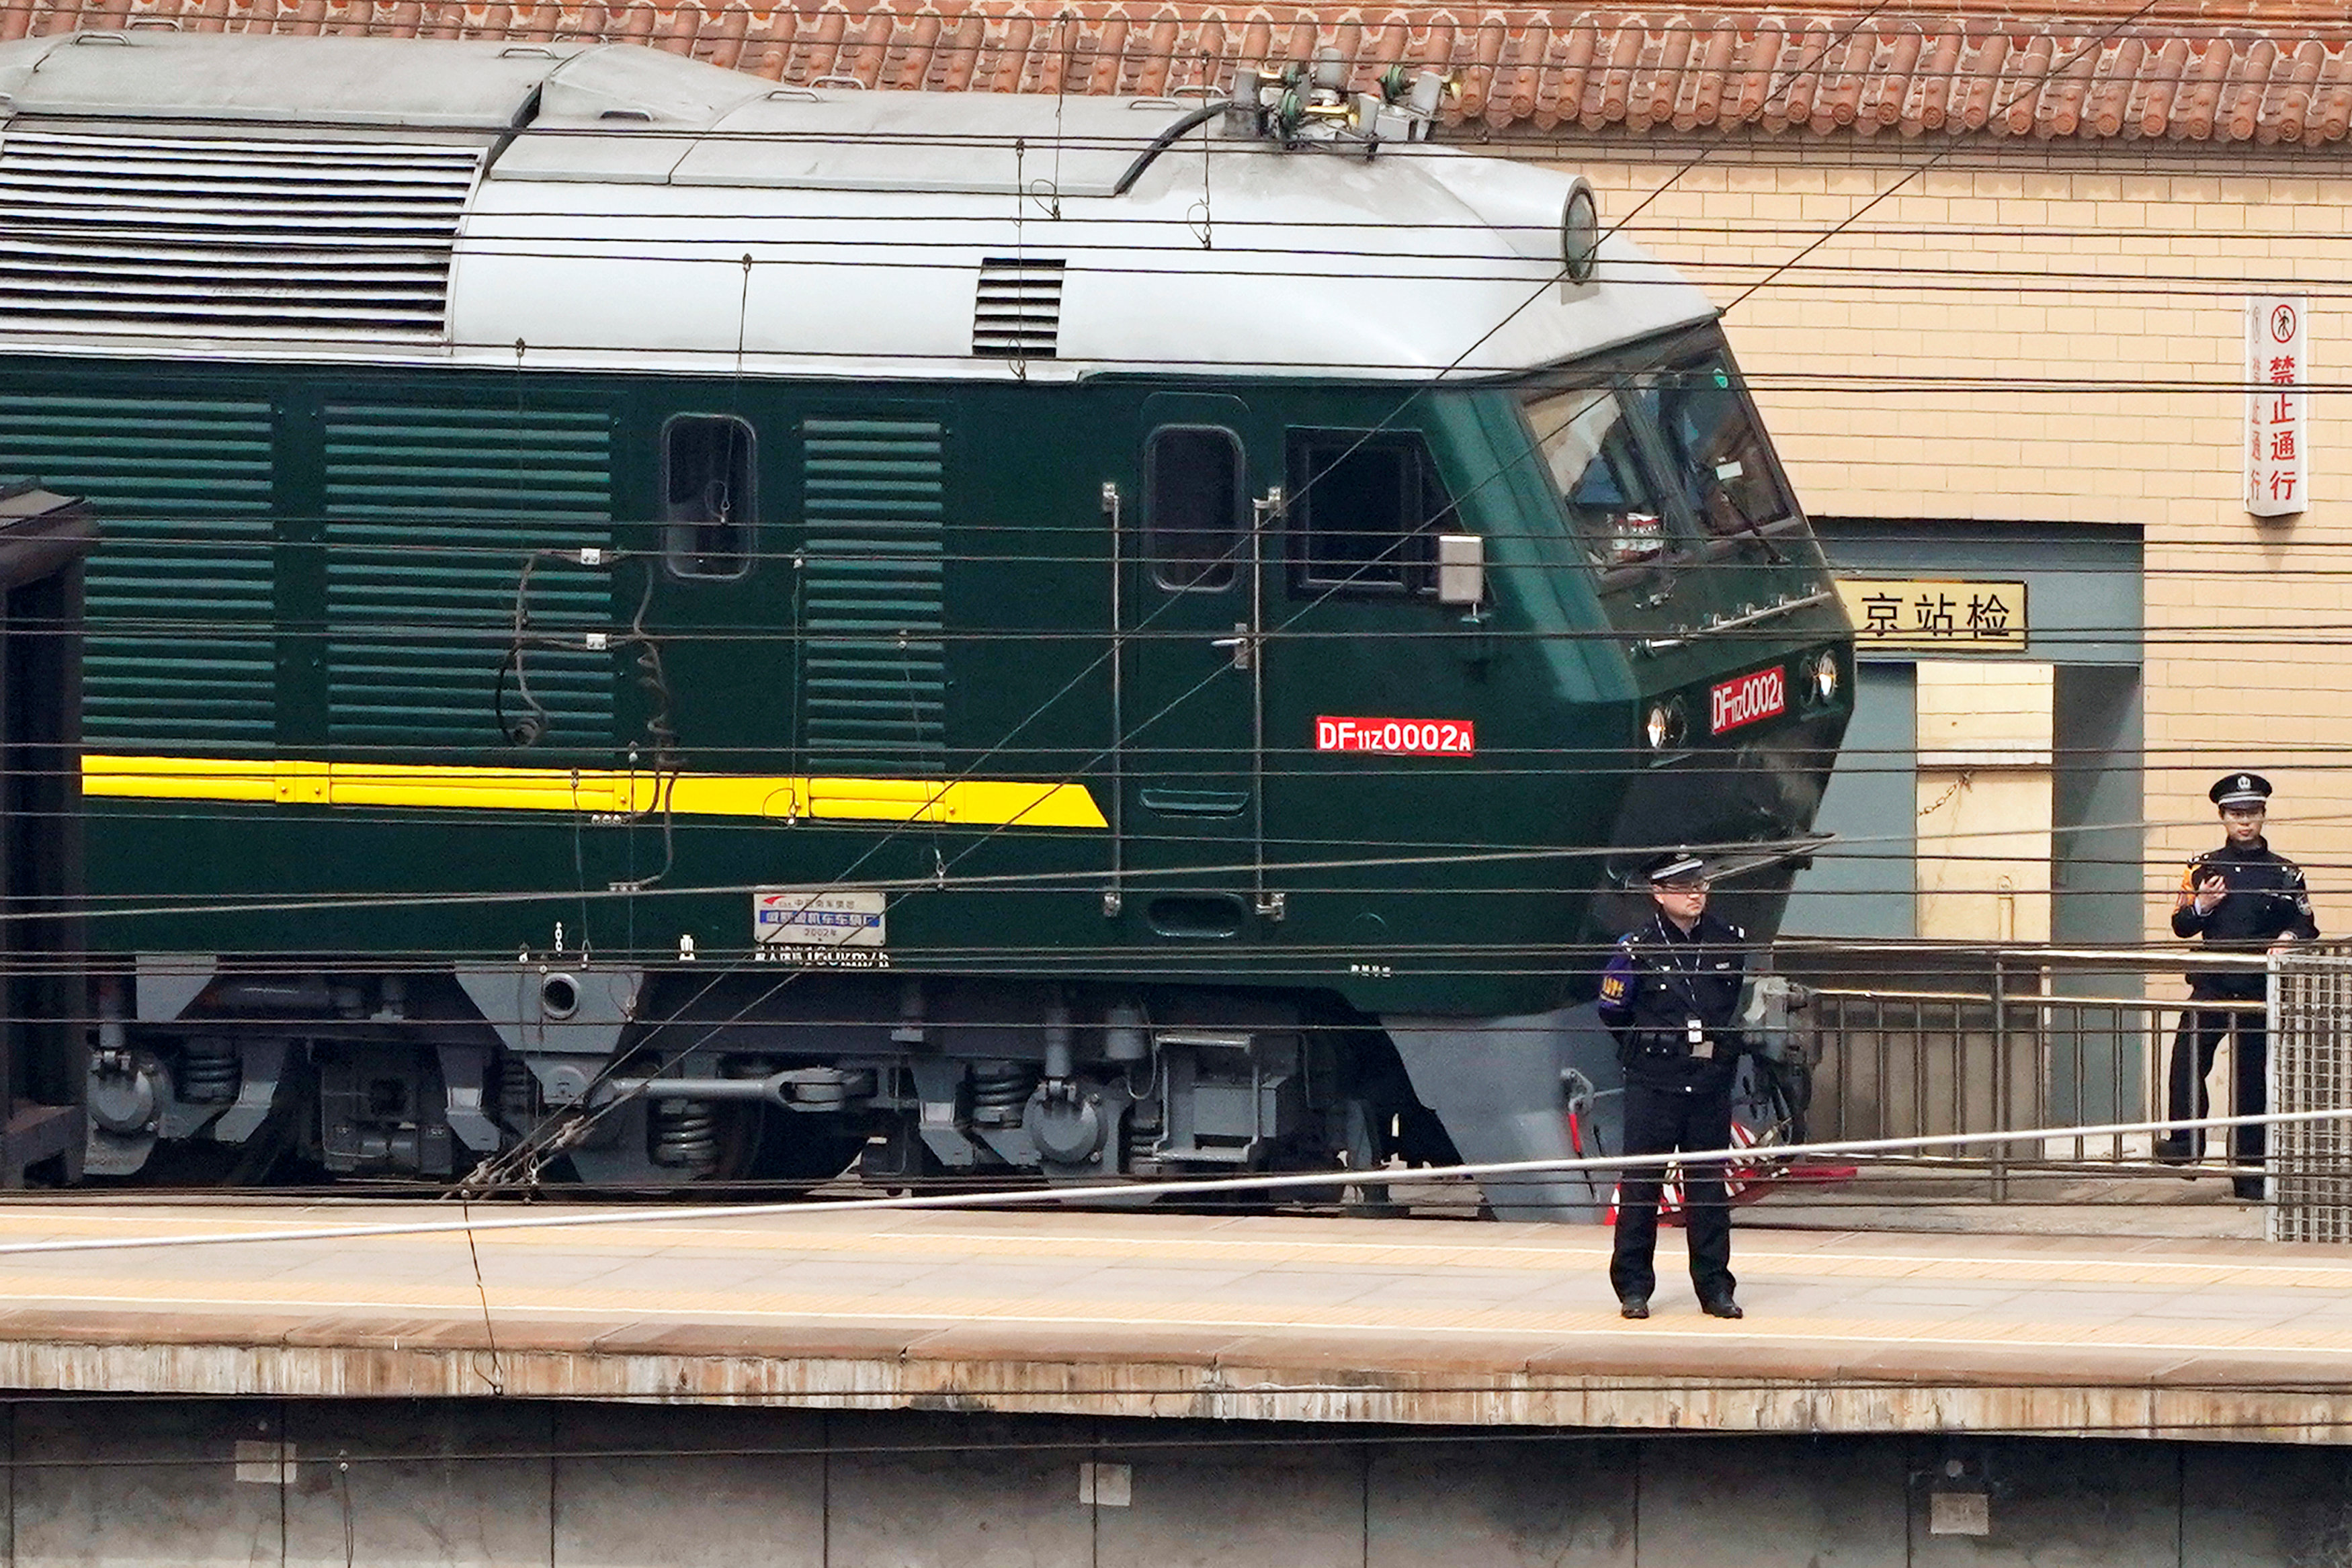 Police officers keep watch next to a train at the Beijing Railway Station in Beijing